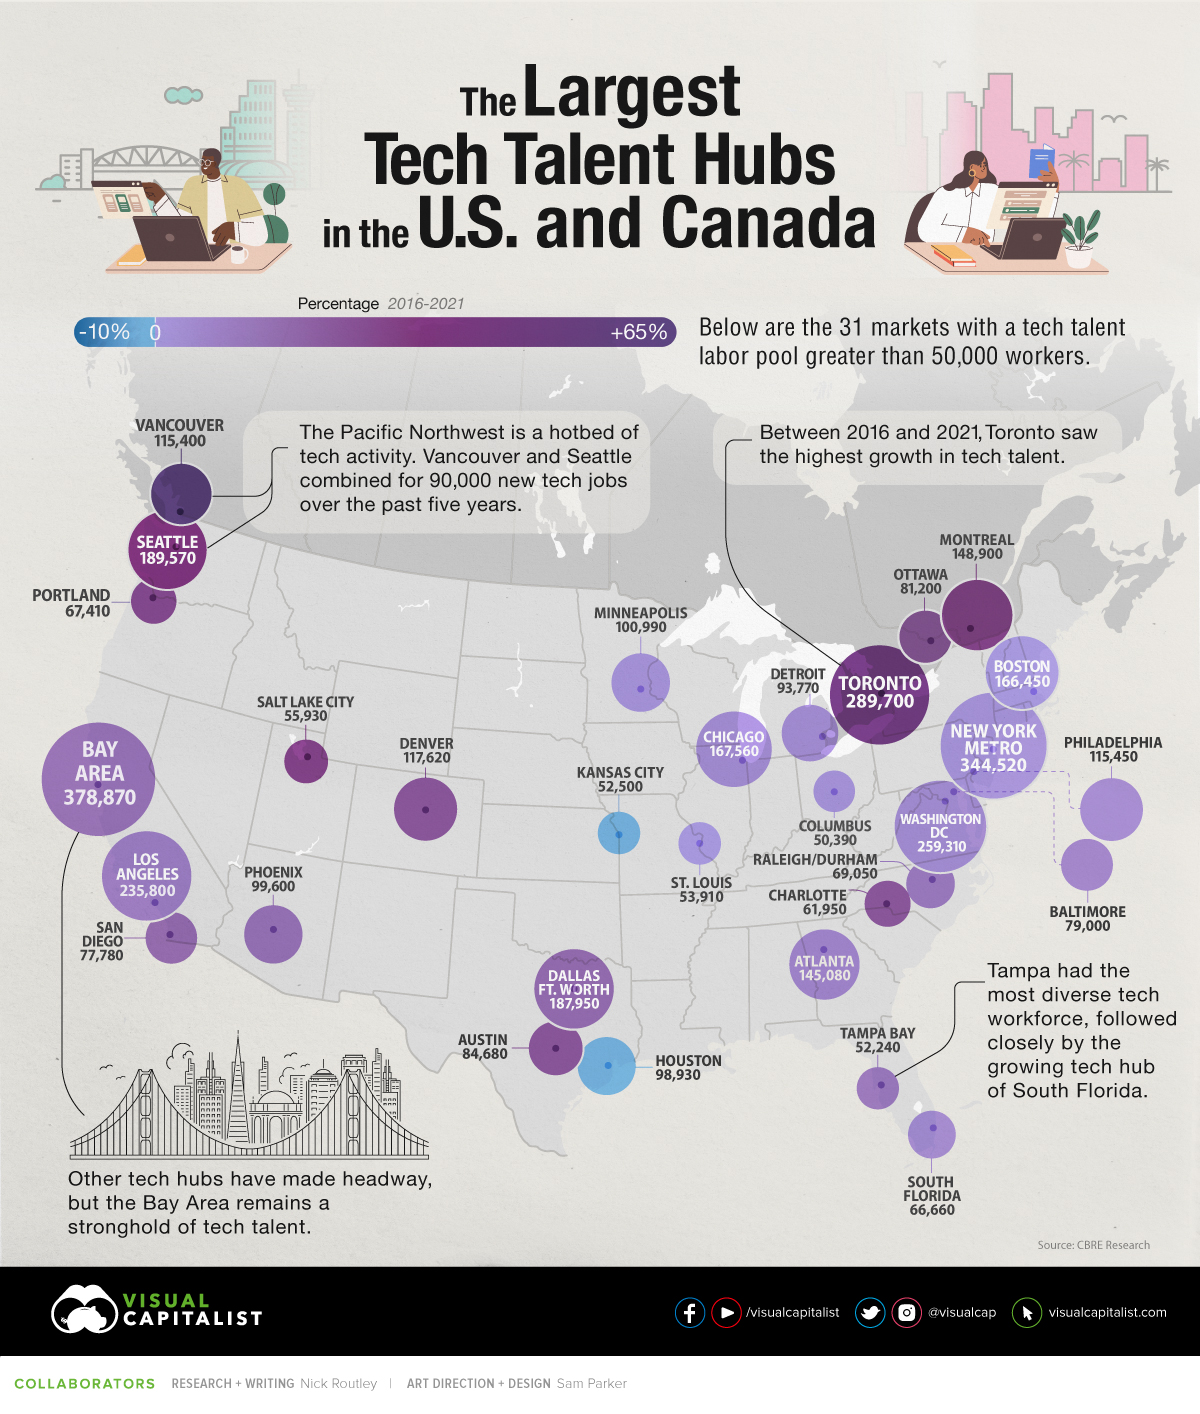 Visualizing the biggest tech talent hubs in the U.S. and Canada